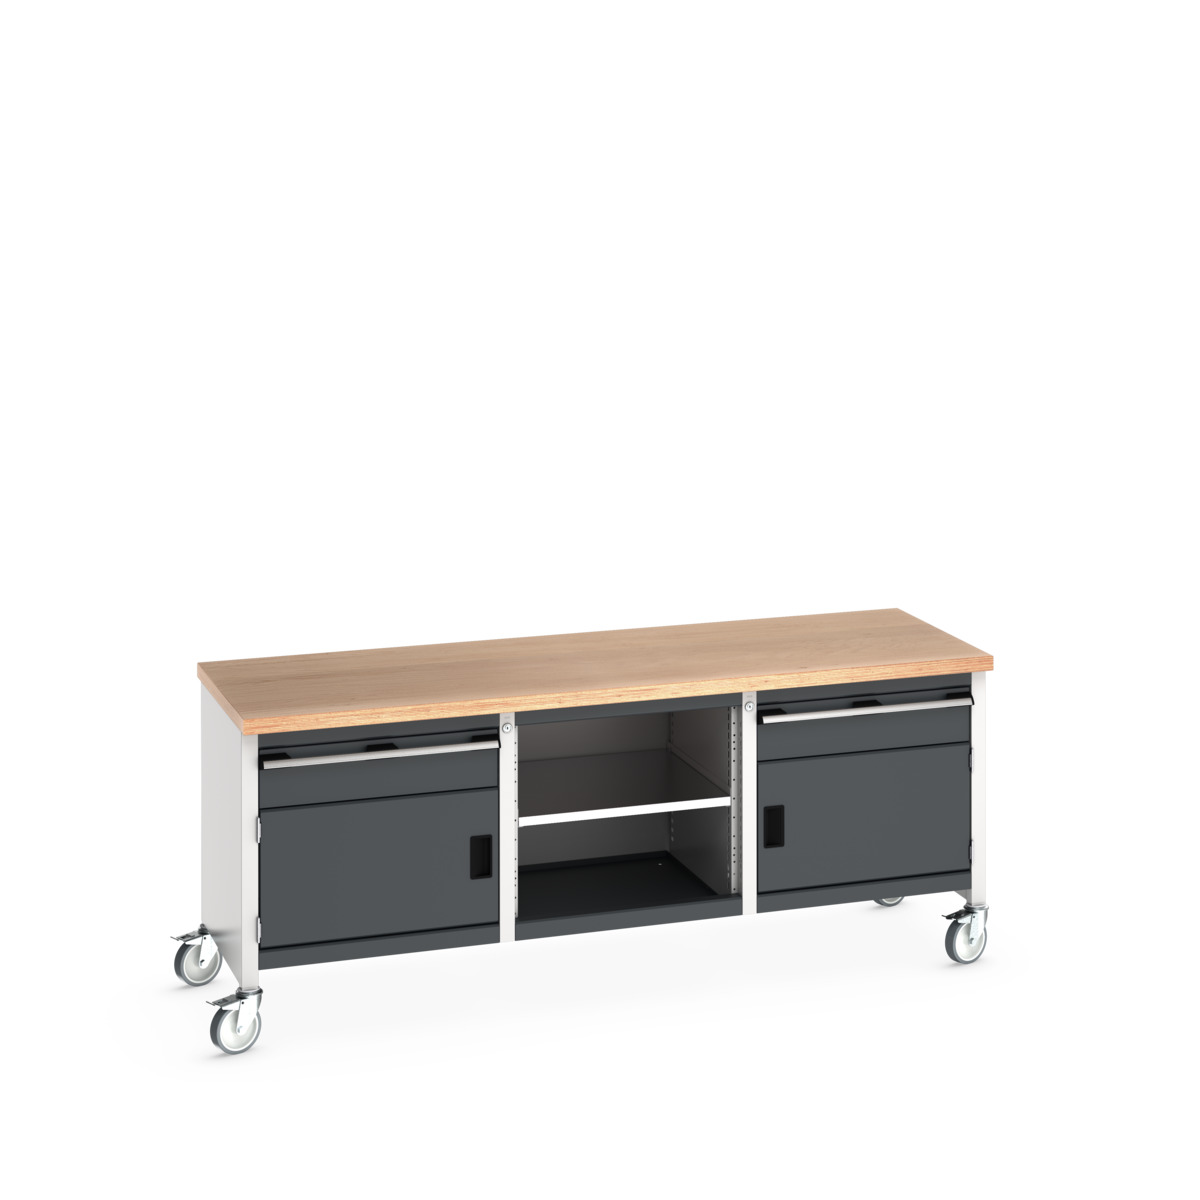 41002121.19V - cubio mobile storage bench (mpx)